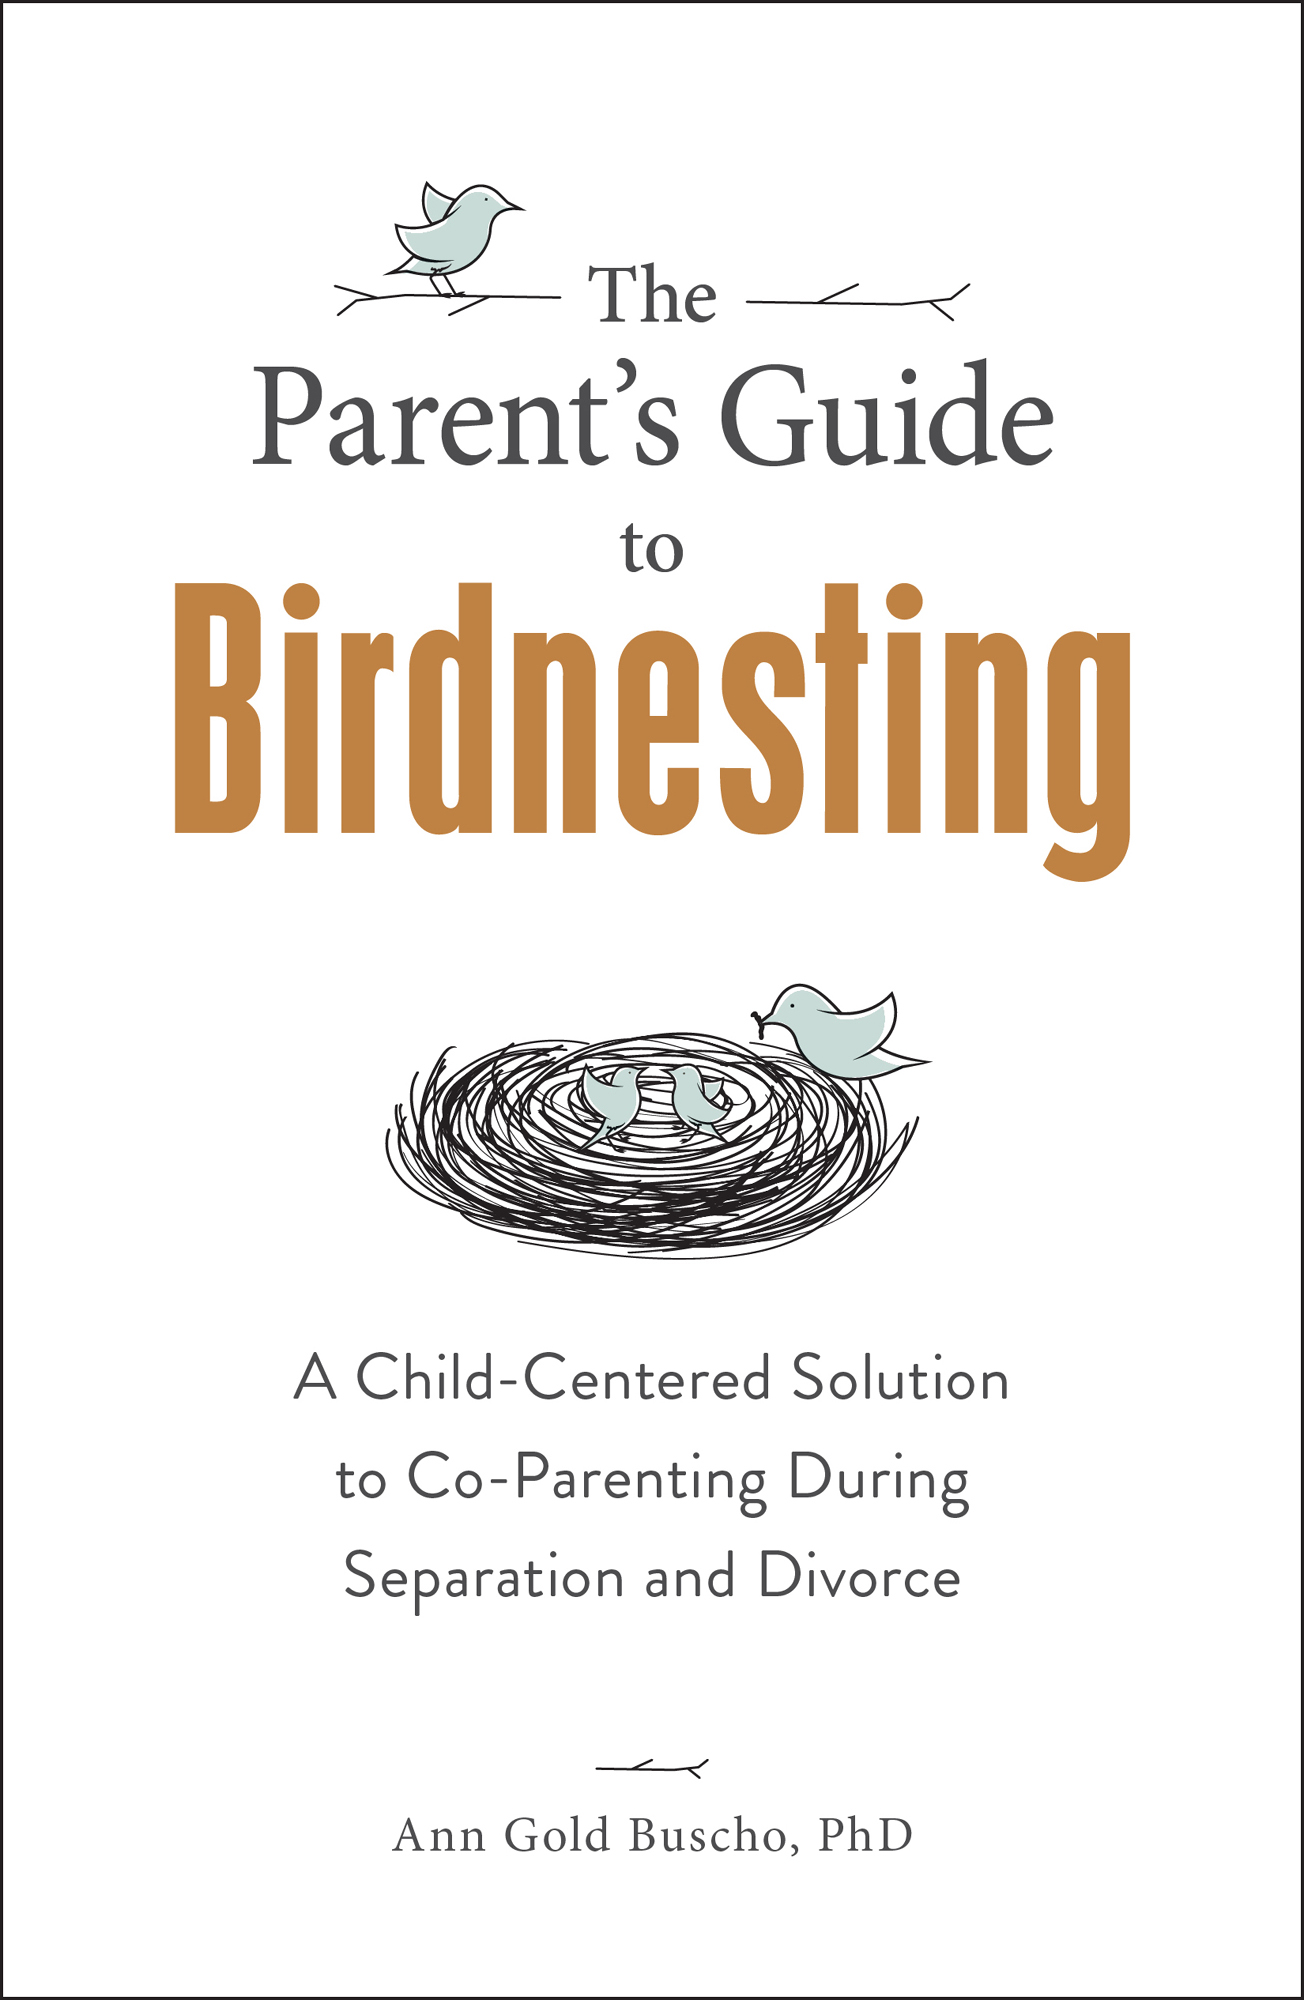 The Parents Guide to Birdnesting A Child-Centered Solution to Co-Parenting During Separation and Divorce - image 1